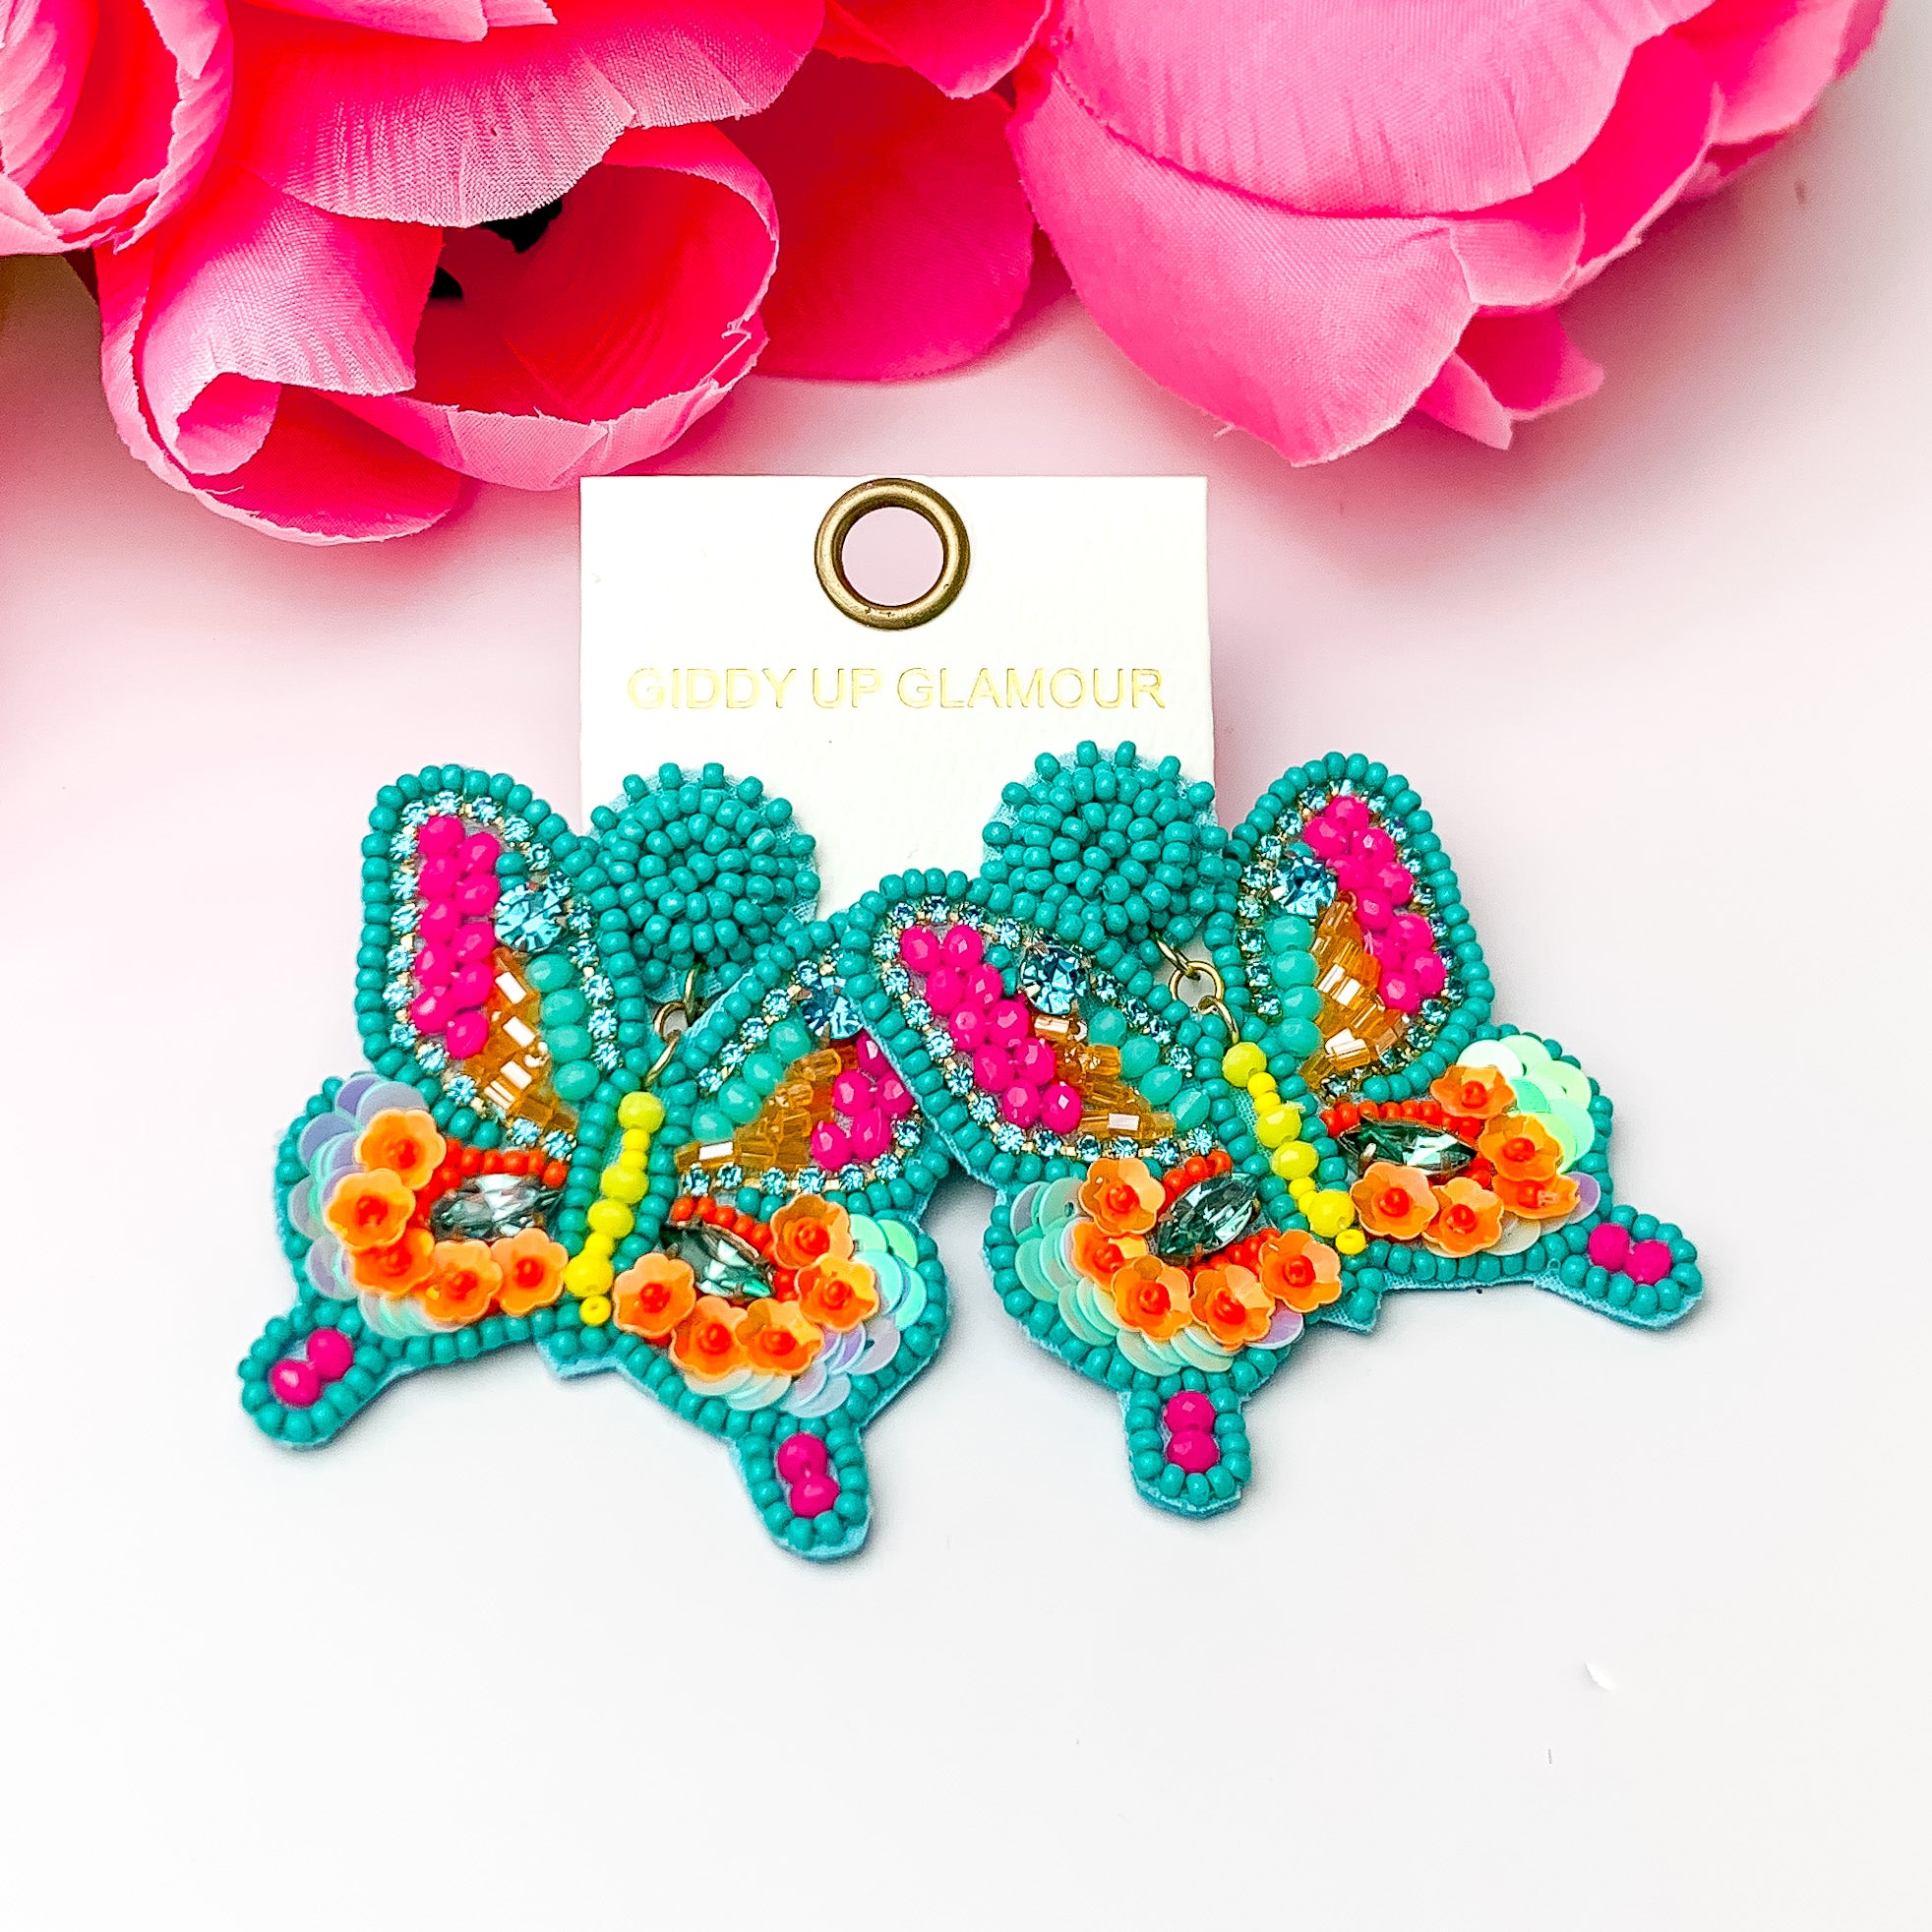 Beaded butterfly earrings in teal pink and orange. Pictured on a white background with pink flowers at the top.